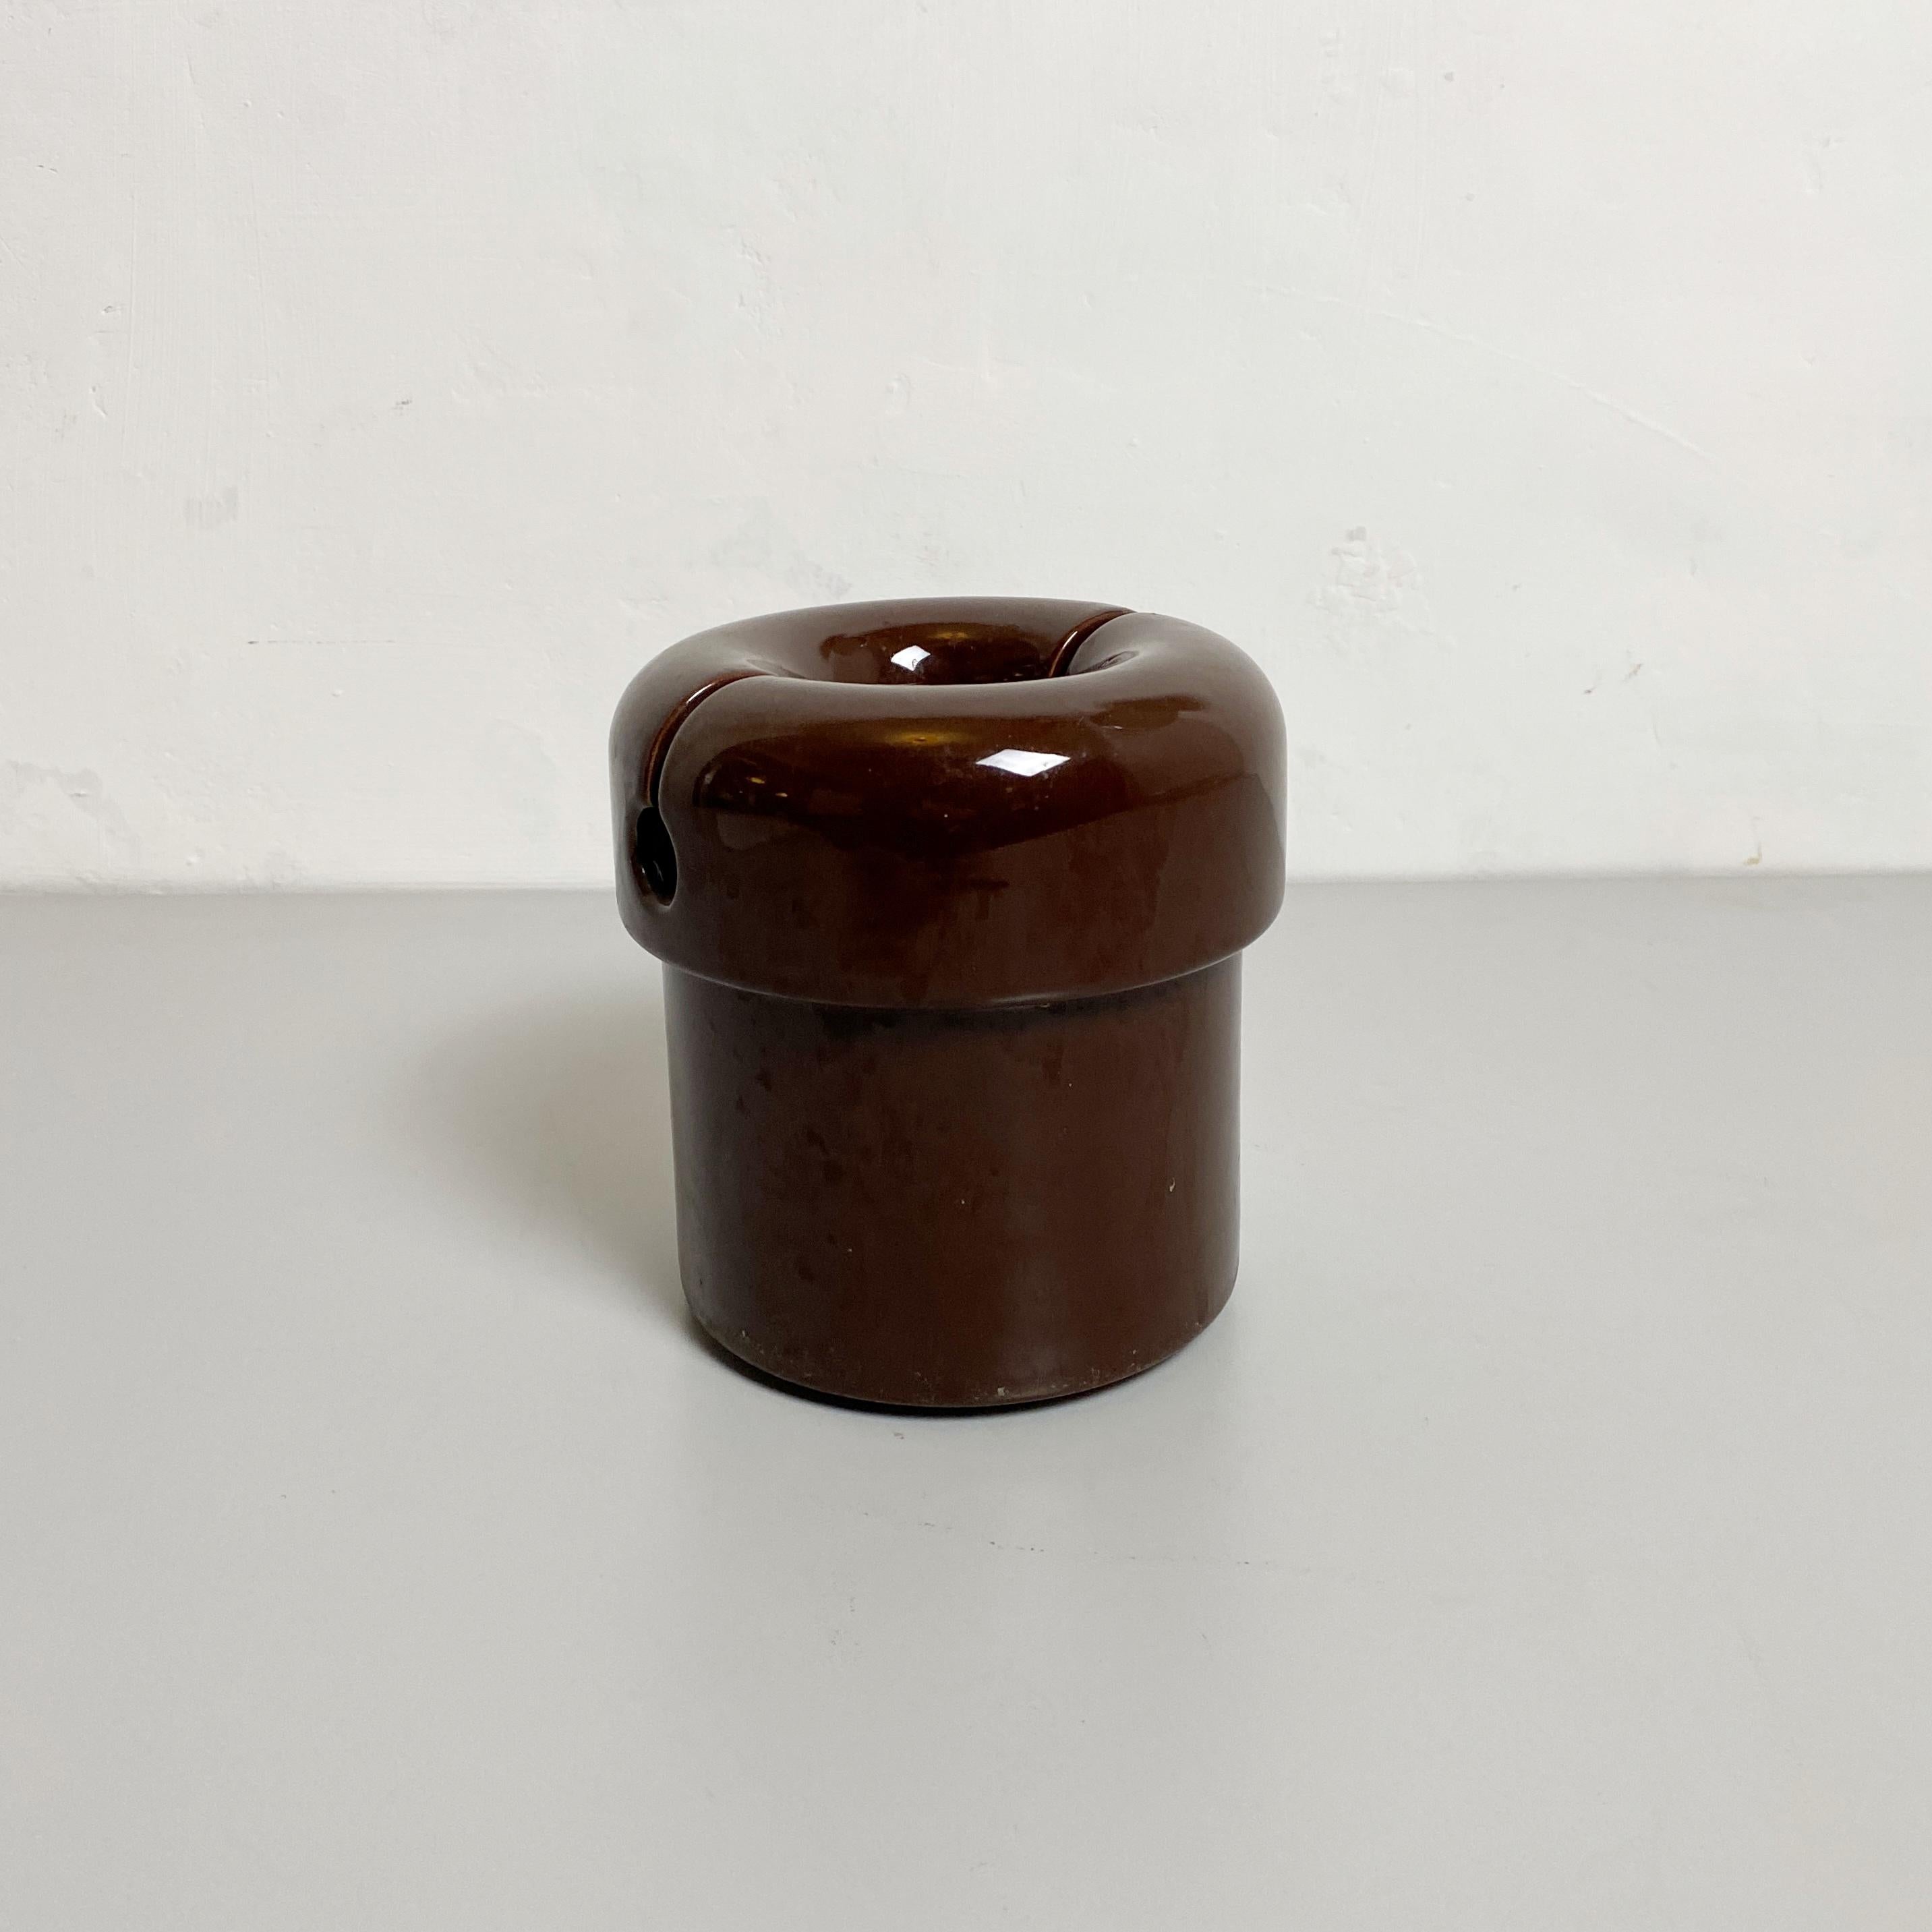 Italian Mid-Century Modern Brown Ceramic Vase by Lineareorm, 1960s For Sale 6